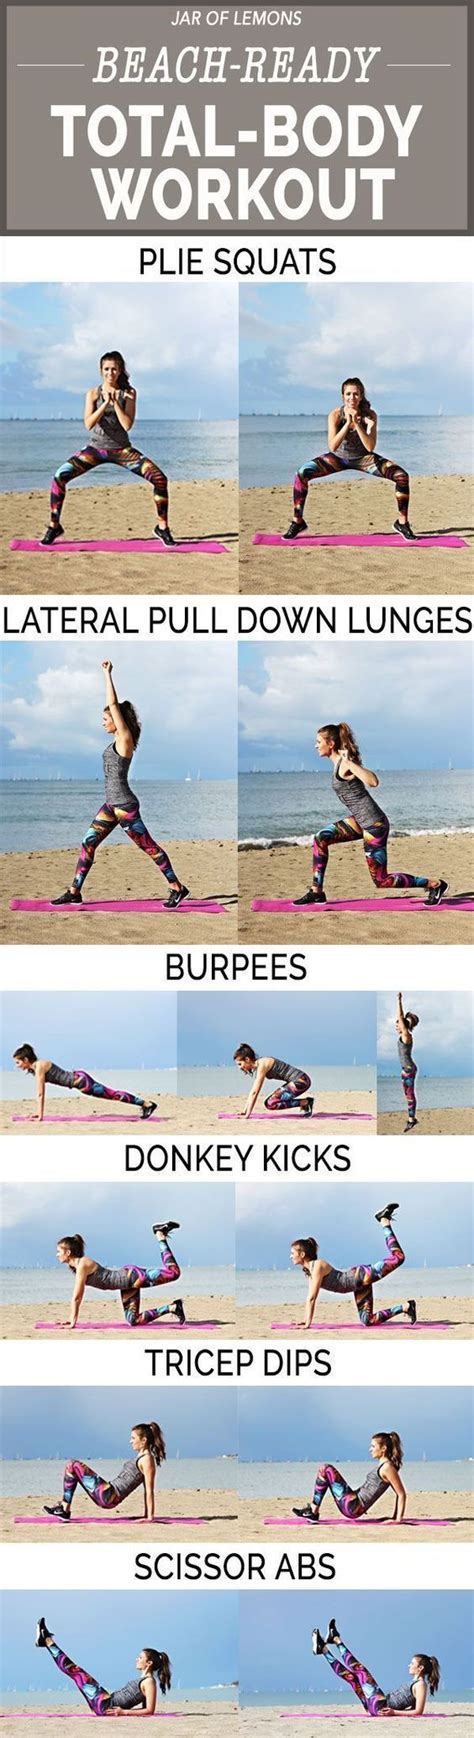 Get Beach Ready With This Fat Burning And Toning Total Body Workout No